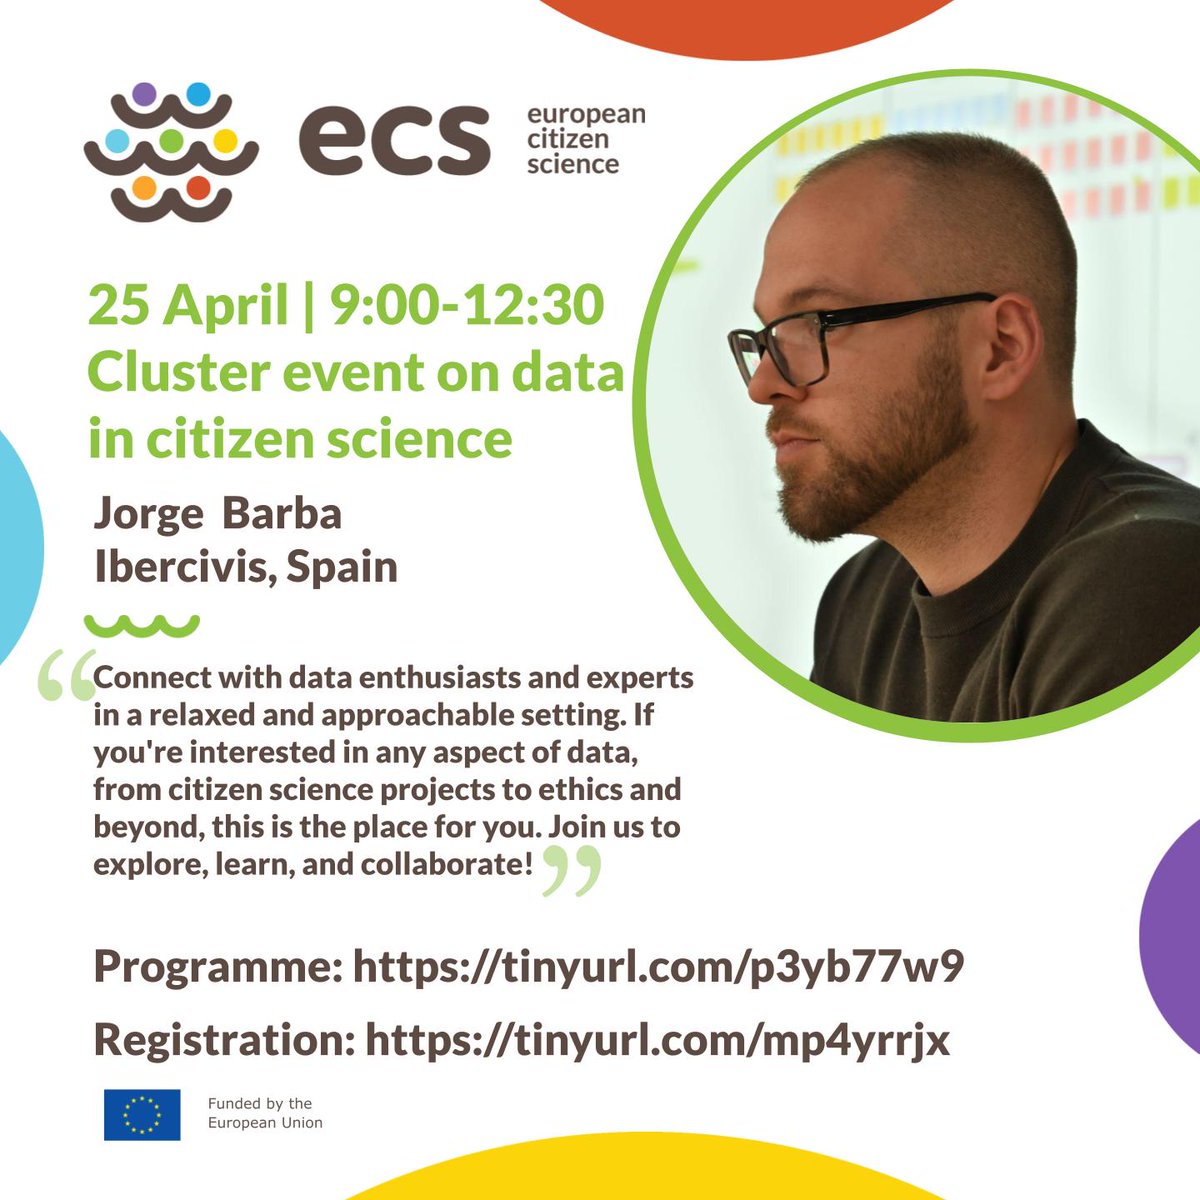 ECS CLUSTER EVENT 𝗟𝗲𝘁'𝘀 𝗱𝗶𝘀𝗰𝘂𝘀𝘀 𝗱𝗮𝘁𝗮 𝗮𝗻𝗱 𝘁𝗵𝗲 𝗻𝗲𝘄 𝗲𝘂-𝗰𝗶𝘁𝗶𝘇𝗲𝗻.𝘀𝗰𝗶𝗲𝗻𝗰𝗲 𝗽𝗹𝗮𝘁𝗳𝗼𝗿𝗺 When: 24 and 25 April Still in doubt whether to participate? Program: tinyurl.com/p3yb77w9 Registration: tinyurl.com/mp4yrrjx